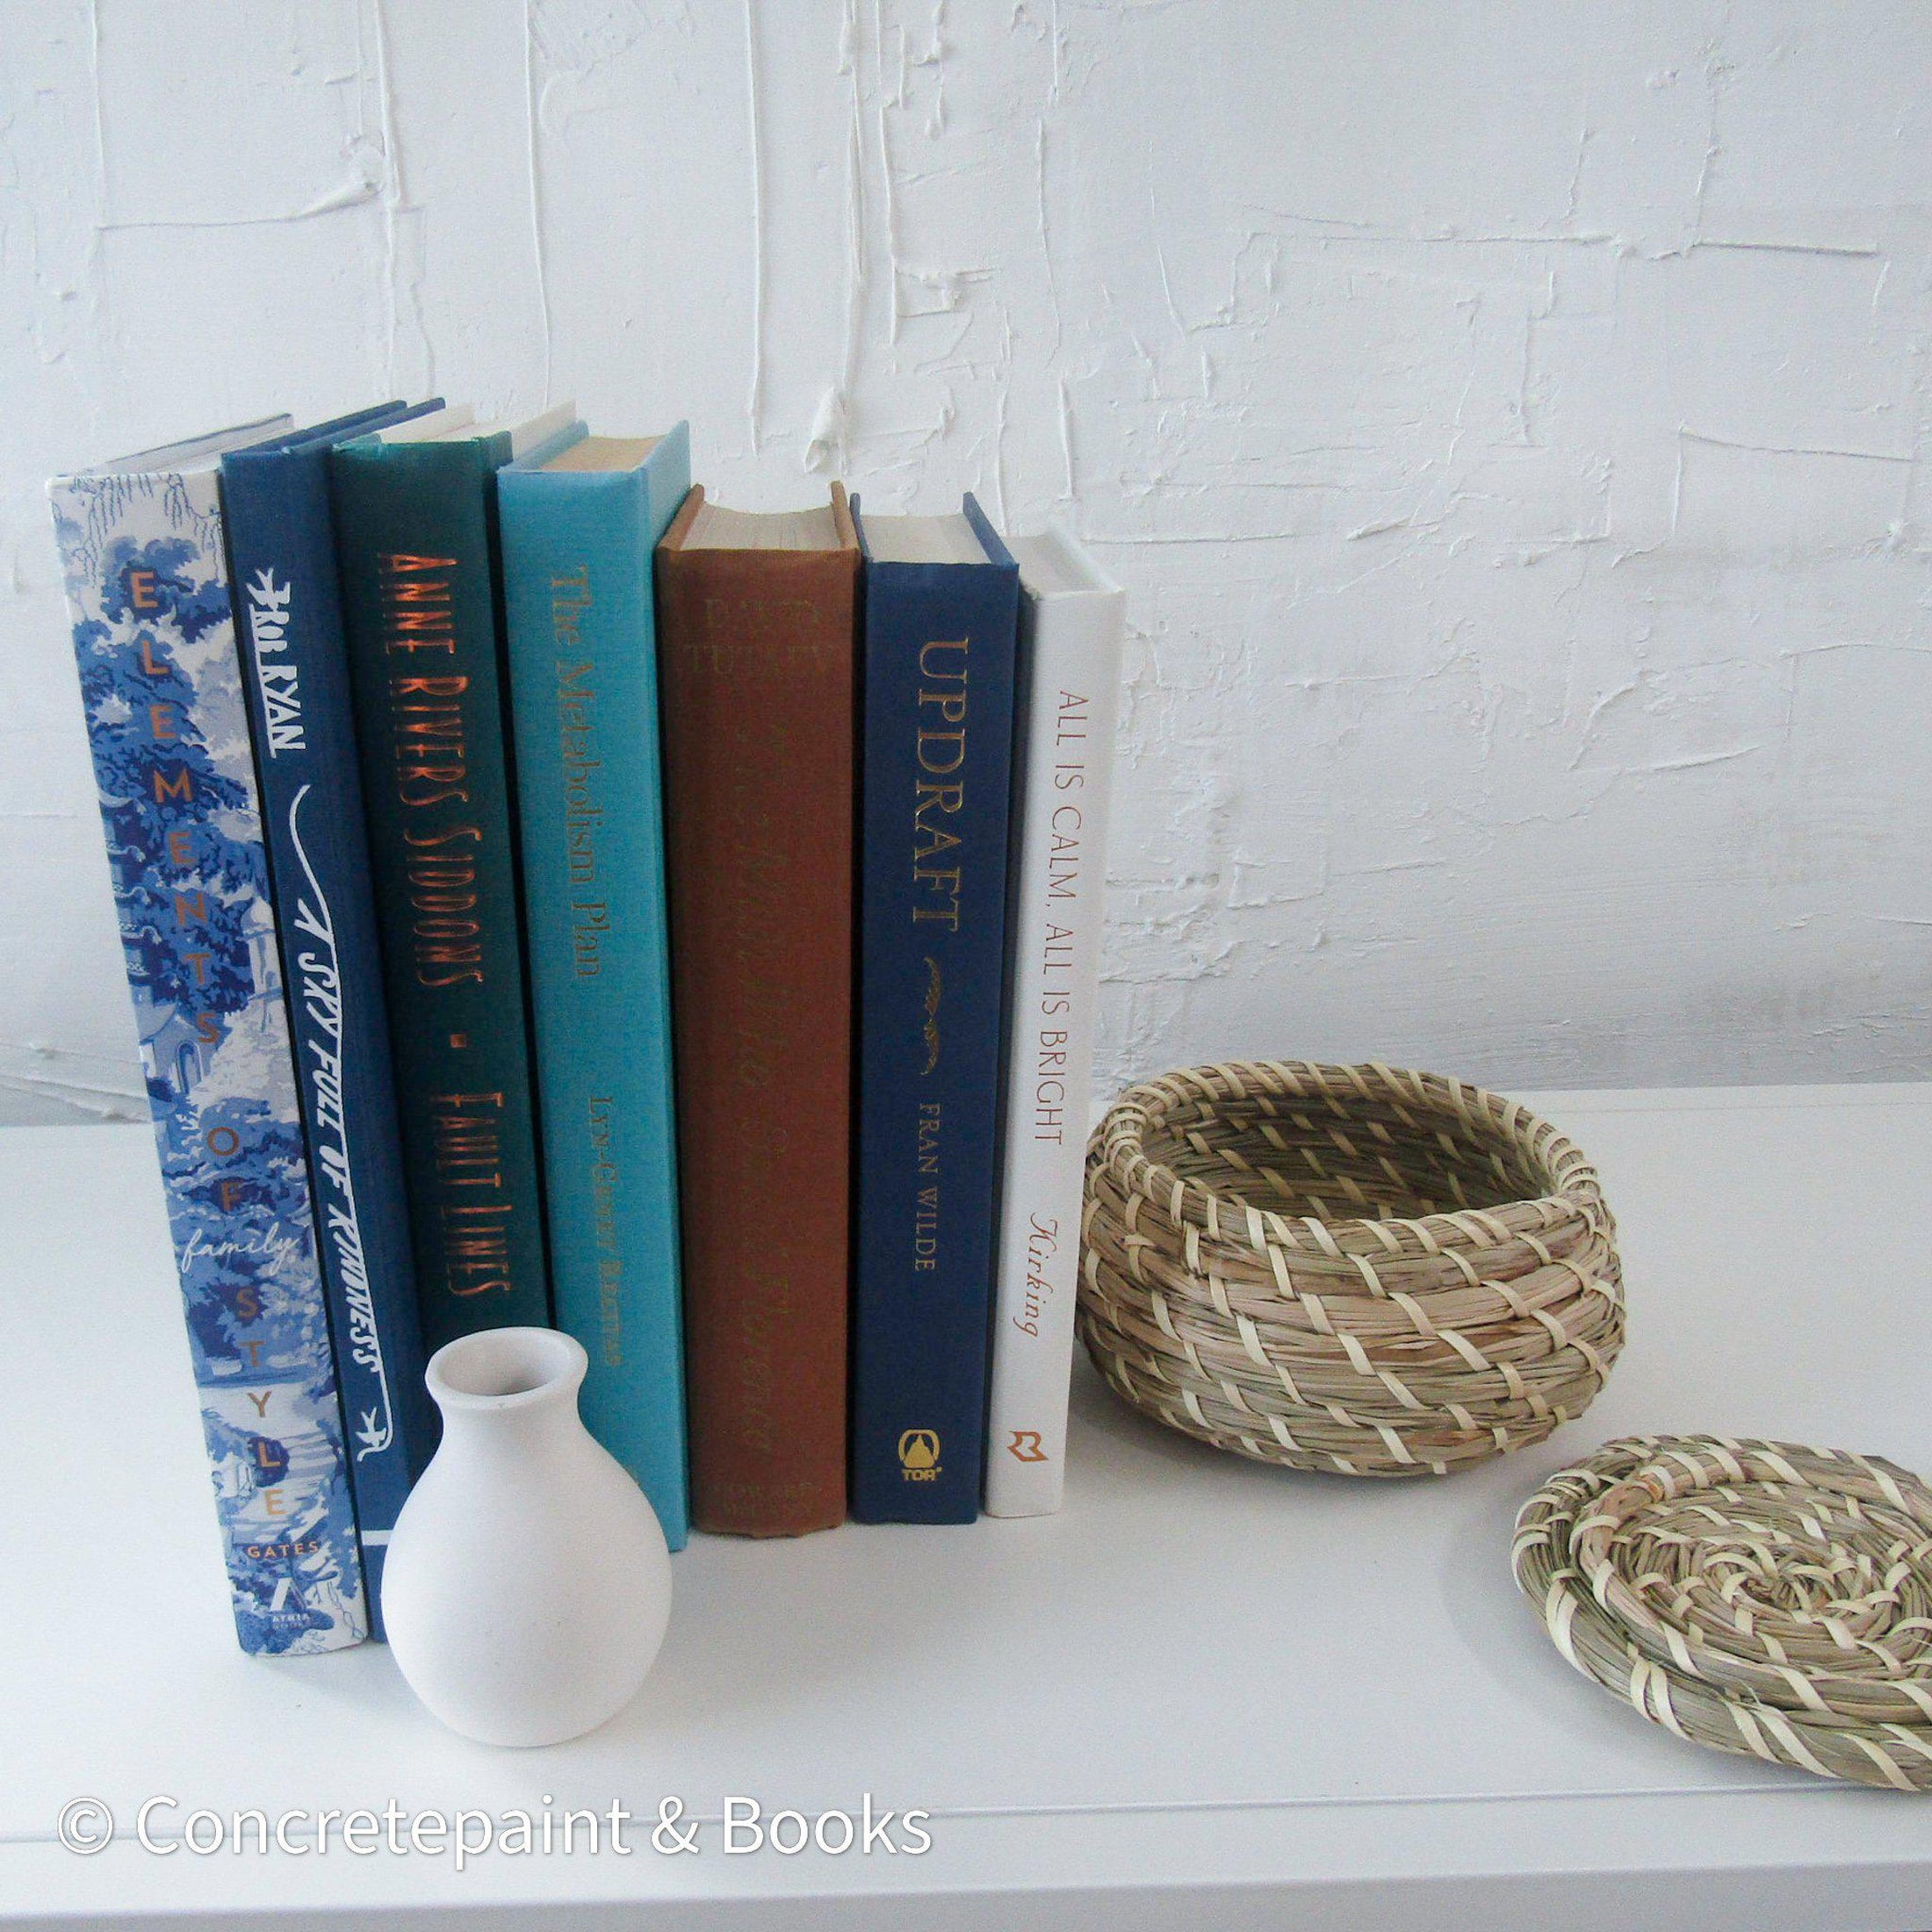 Real hardcover books with ikea seagrass basket and small white vase staged as home décor. Blue, white, green and brown hardcover books.